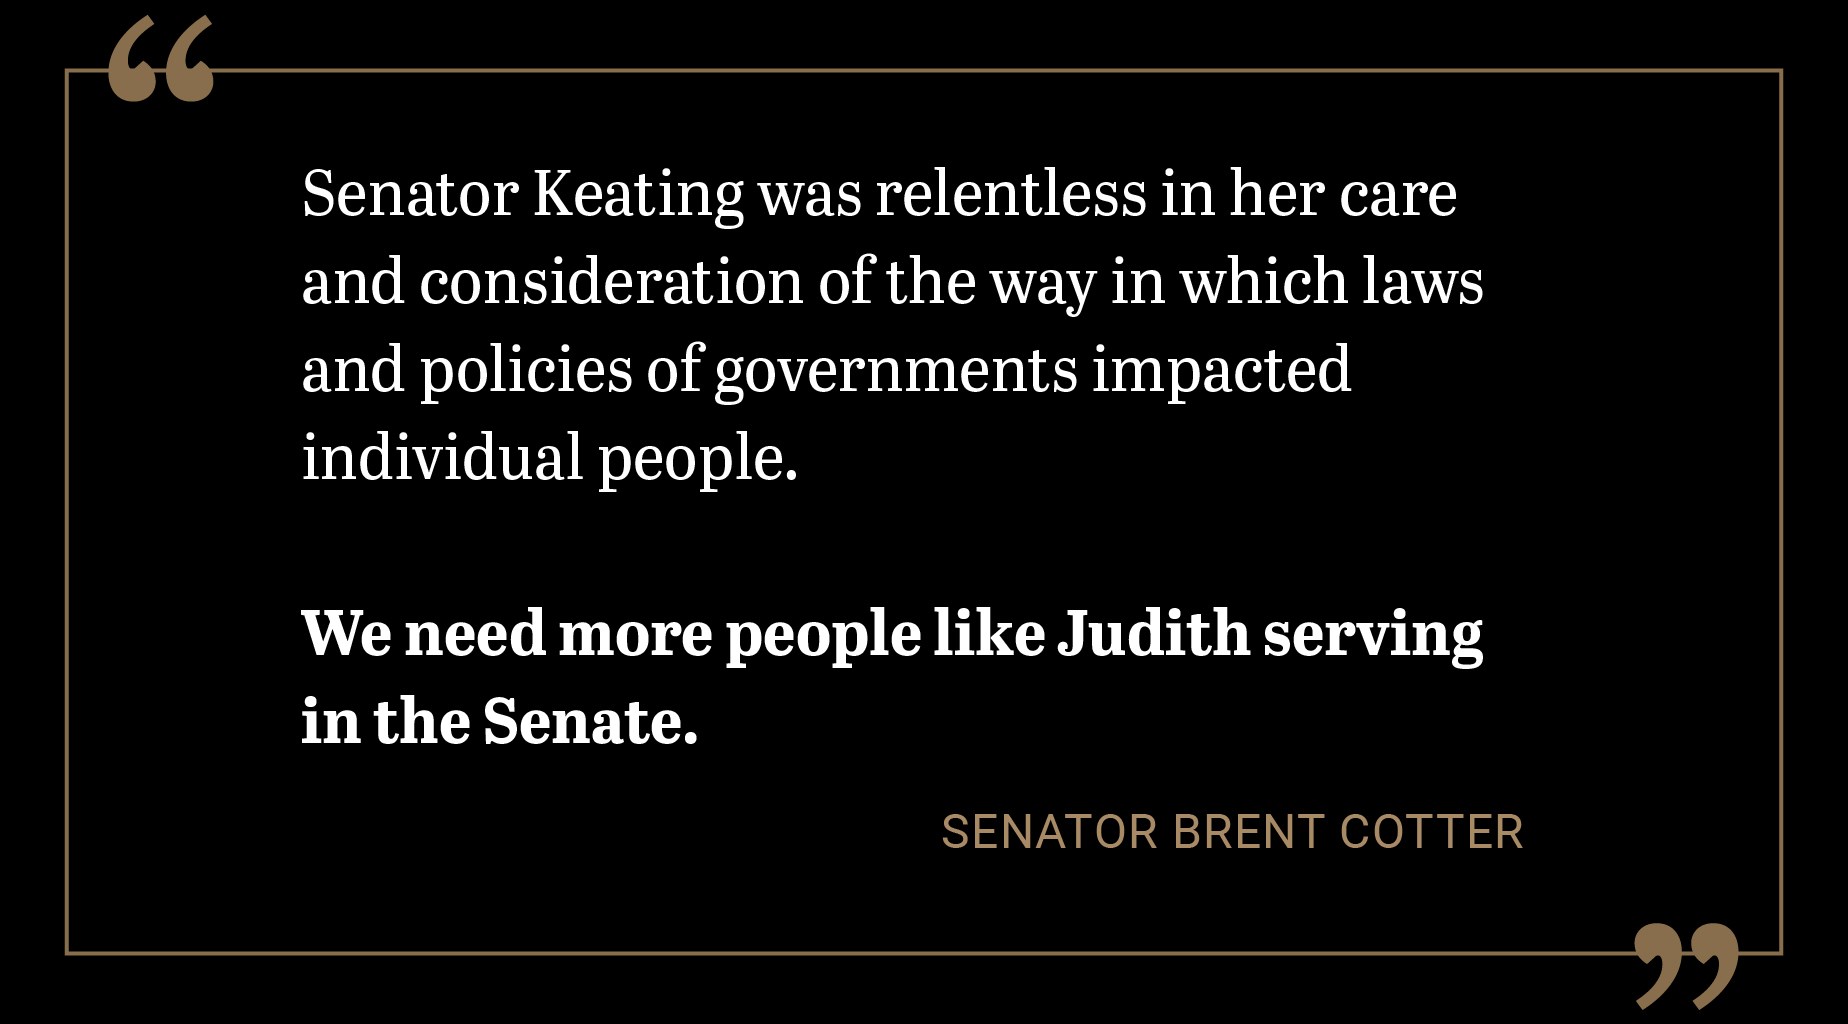 Senator Keating was relentless in her care and consideration of the way in which laws and policies of governments impacted individual people. We need more people like Judith serving in the Senate.